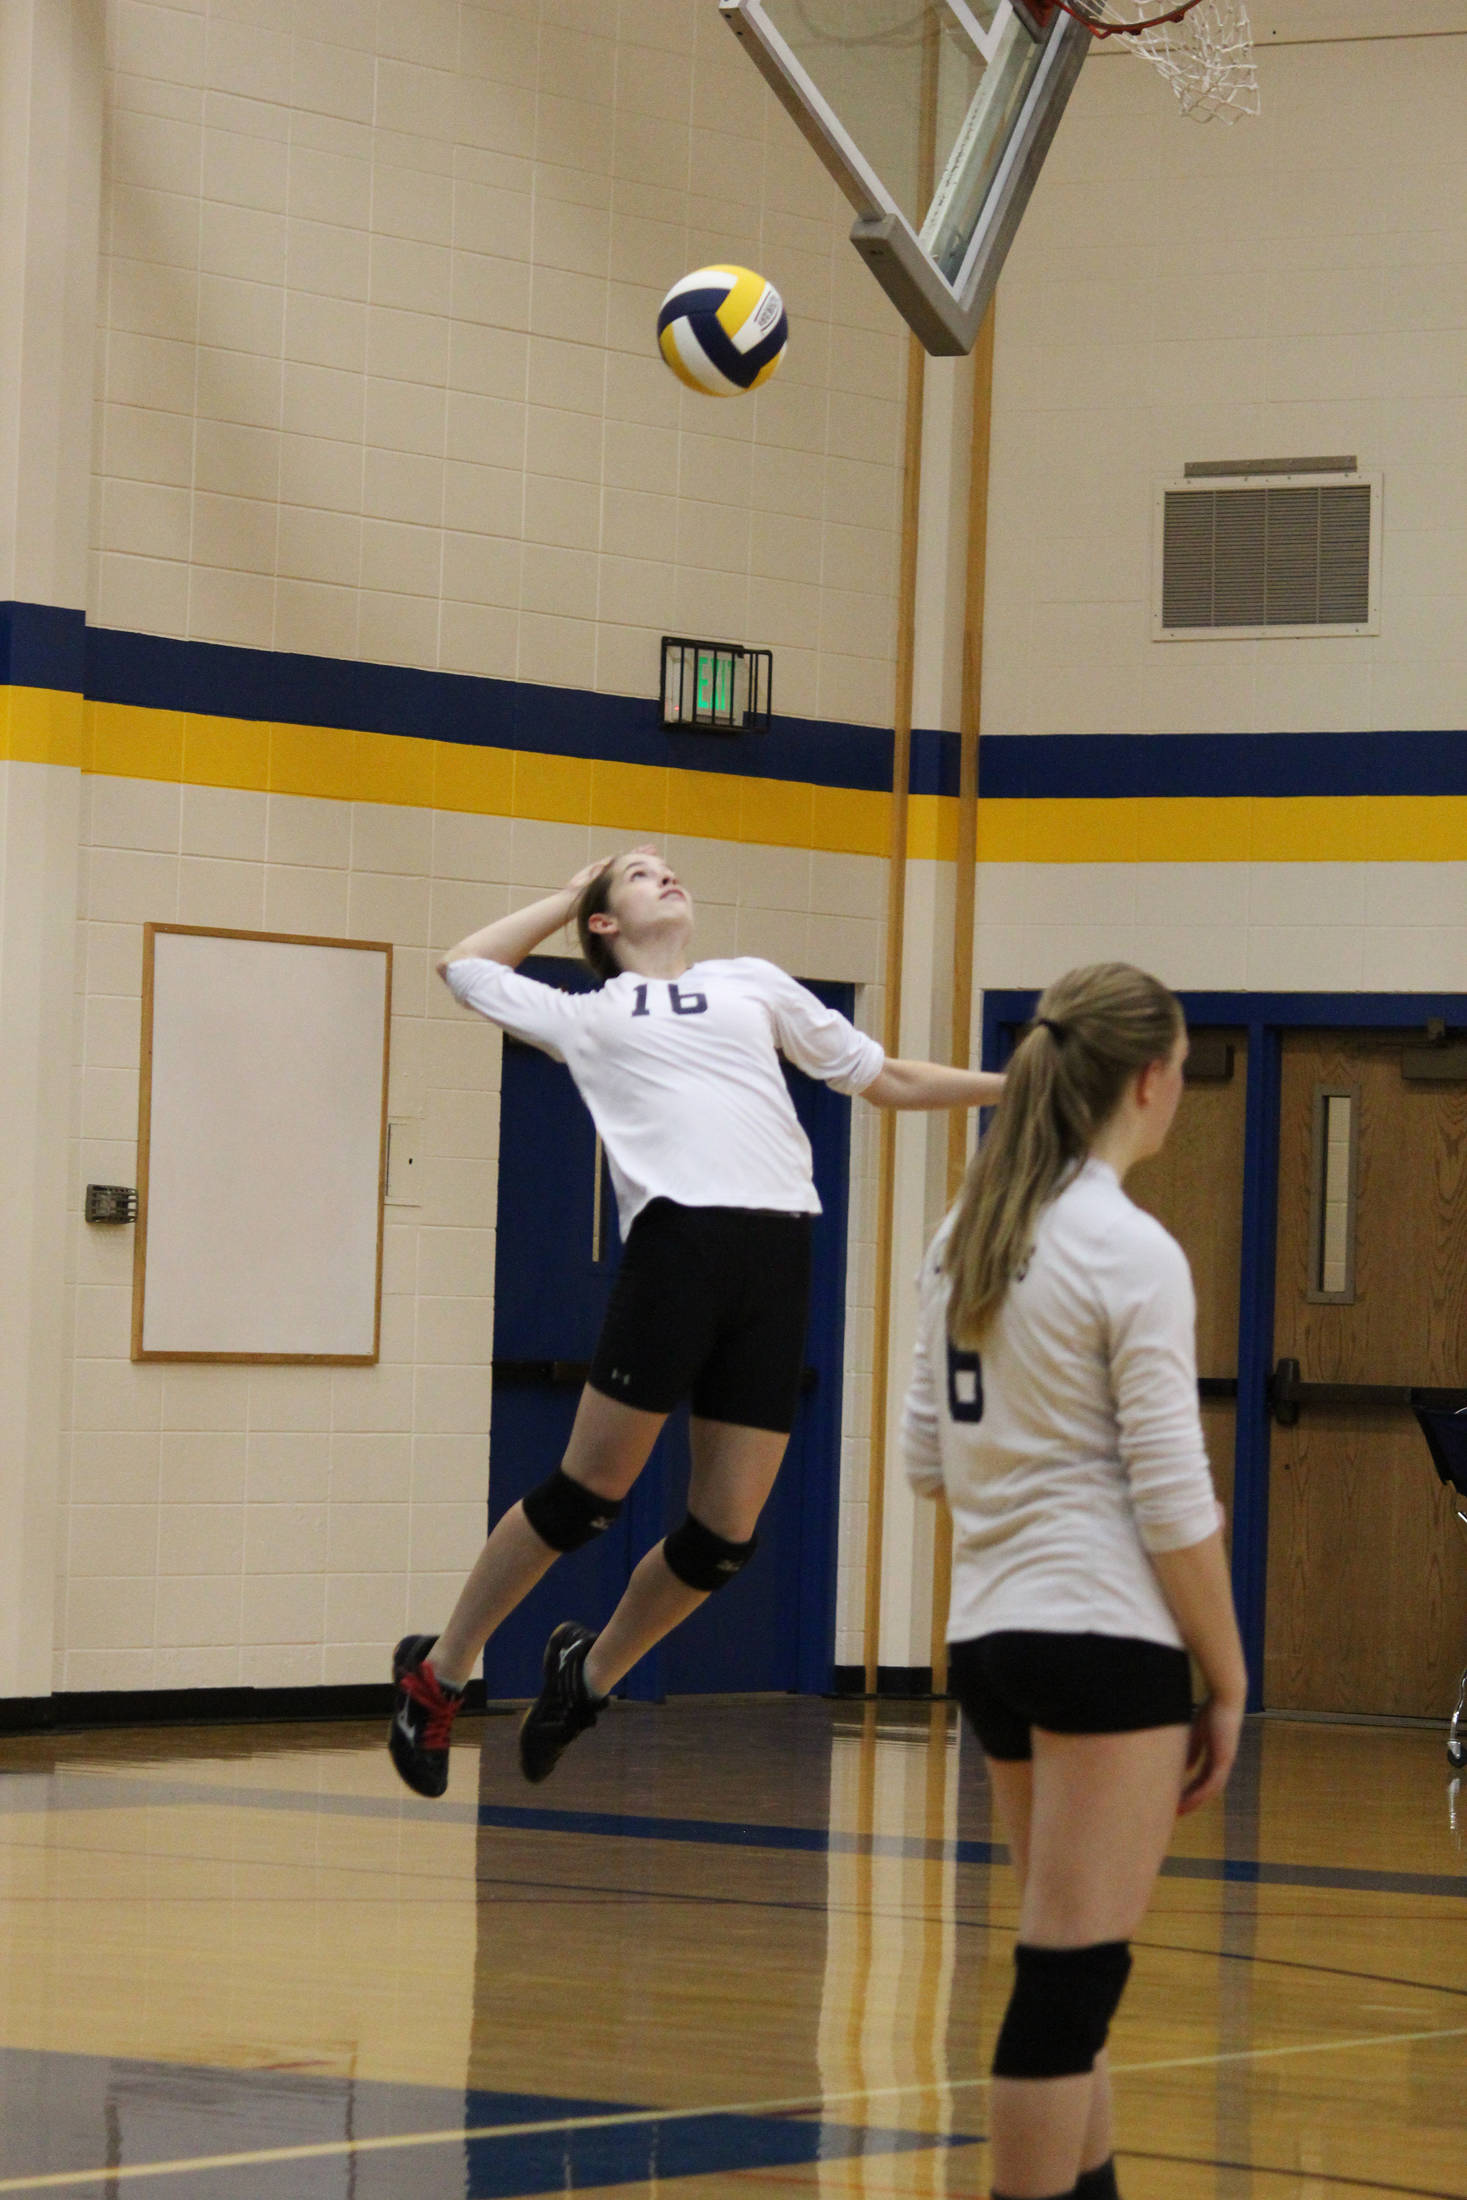 Freshman Laura Inama, a swinger who was pulled up from the Homer Mariner junior varsity volleyball team to play with varsity, serves the ball during the team’s home game against Seward High School on Friday, Sept. 29, 2017 in Homer, Alaska. The Mariners fell to the Seahawks, winning one set to Seward’s three. (Photo by Megan Pacer/Homer News)